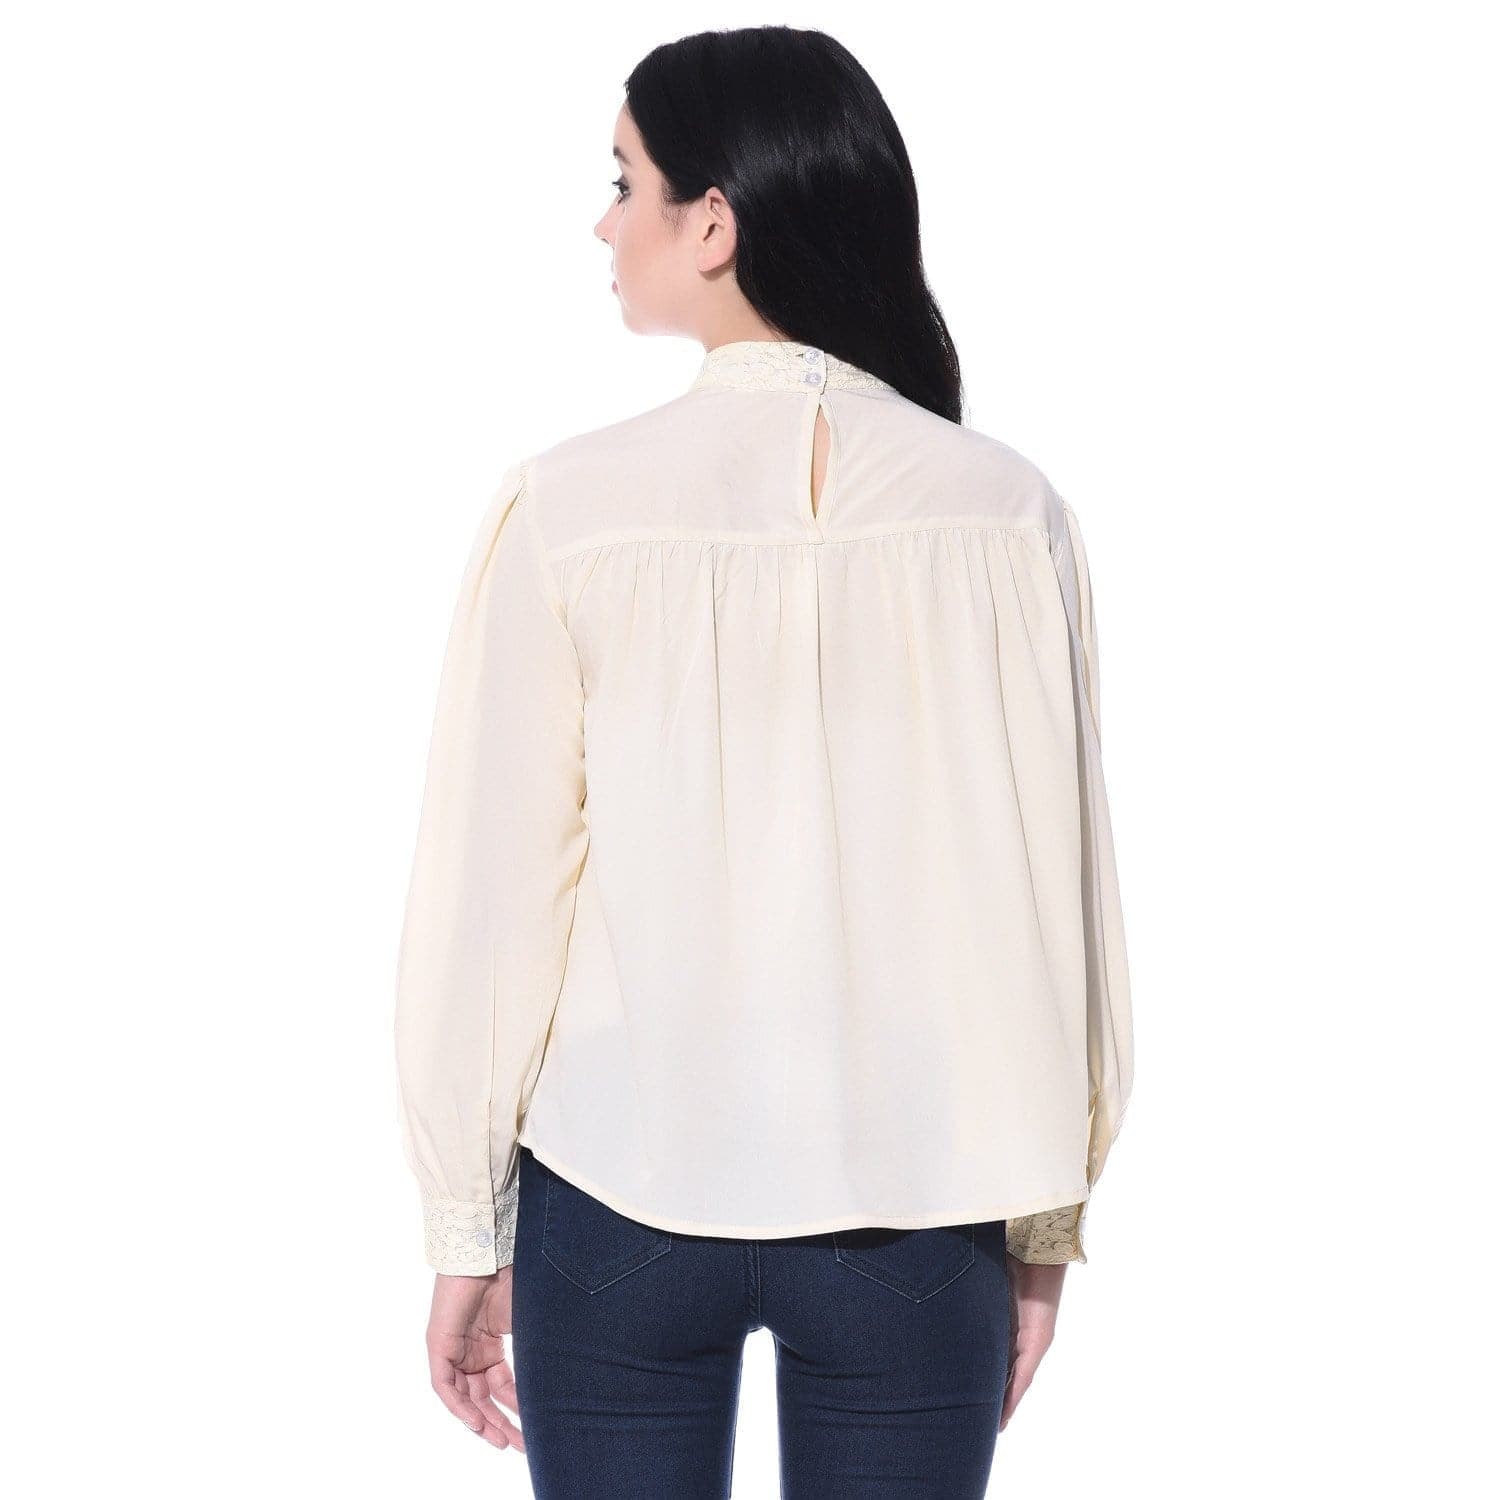 Solid White Long Sleeves Casual Crepe Lace Top - Uptownie